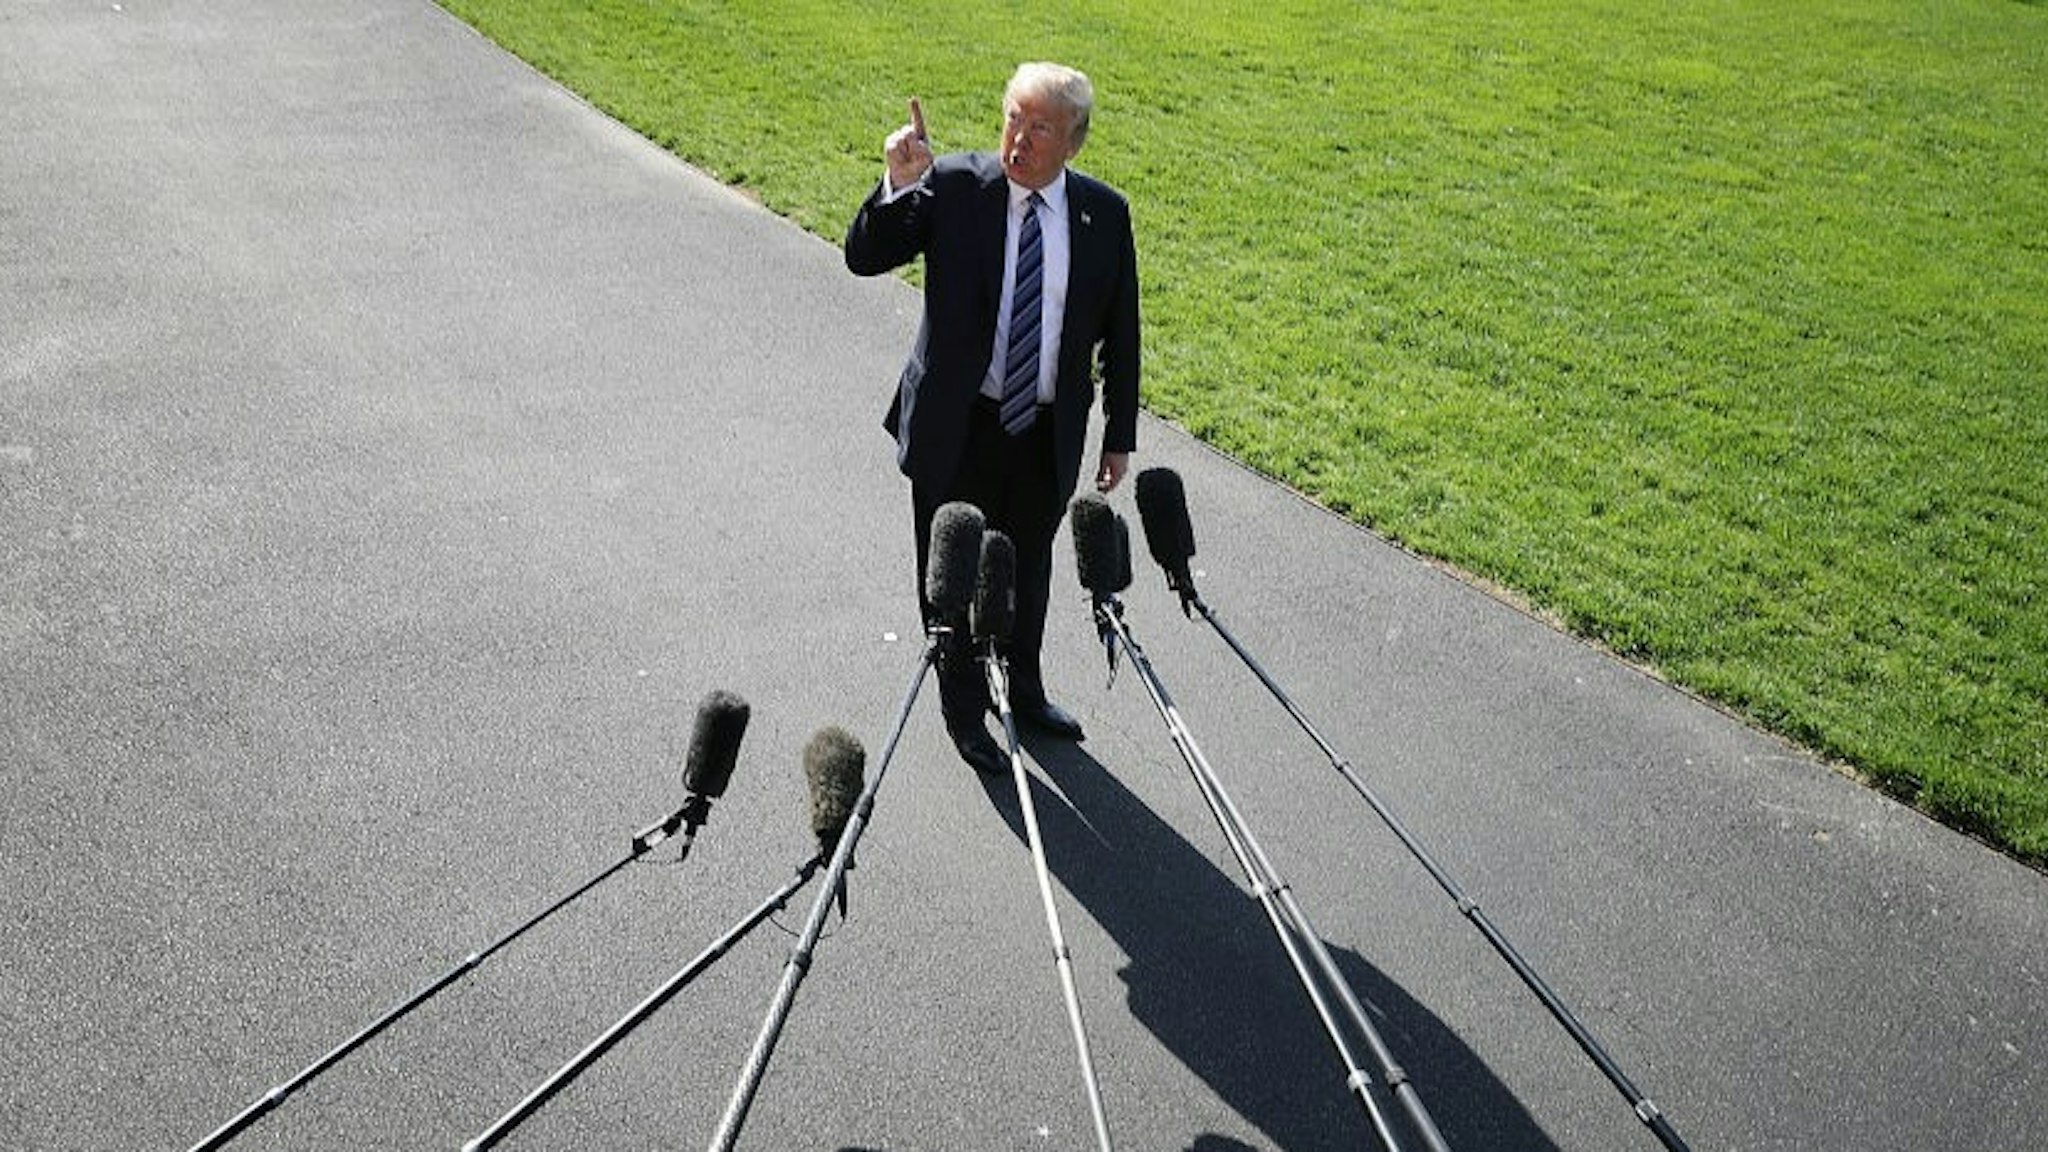 WASHINGTON, DC - MAY 25: U.S. President Donald Trump points up to the second floor of the White House and tells members of the news media that first lady Melania Trump is watching him depart the White House May 25, 2018 in Washington, DC. Trump is traveling to Annapolis, Maryland, to participate in the Naval Academy's graduation ceremony. (Photo by